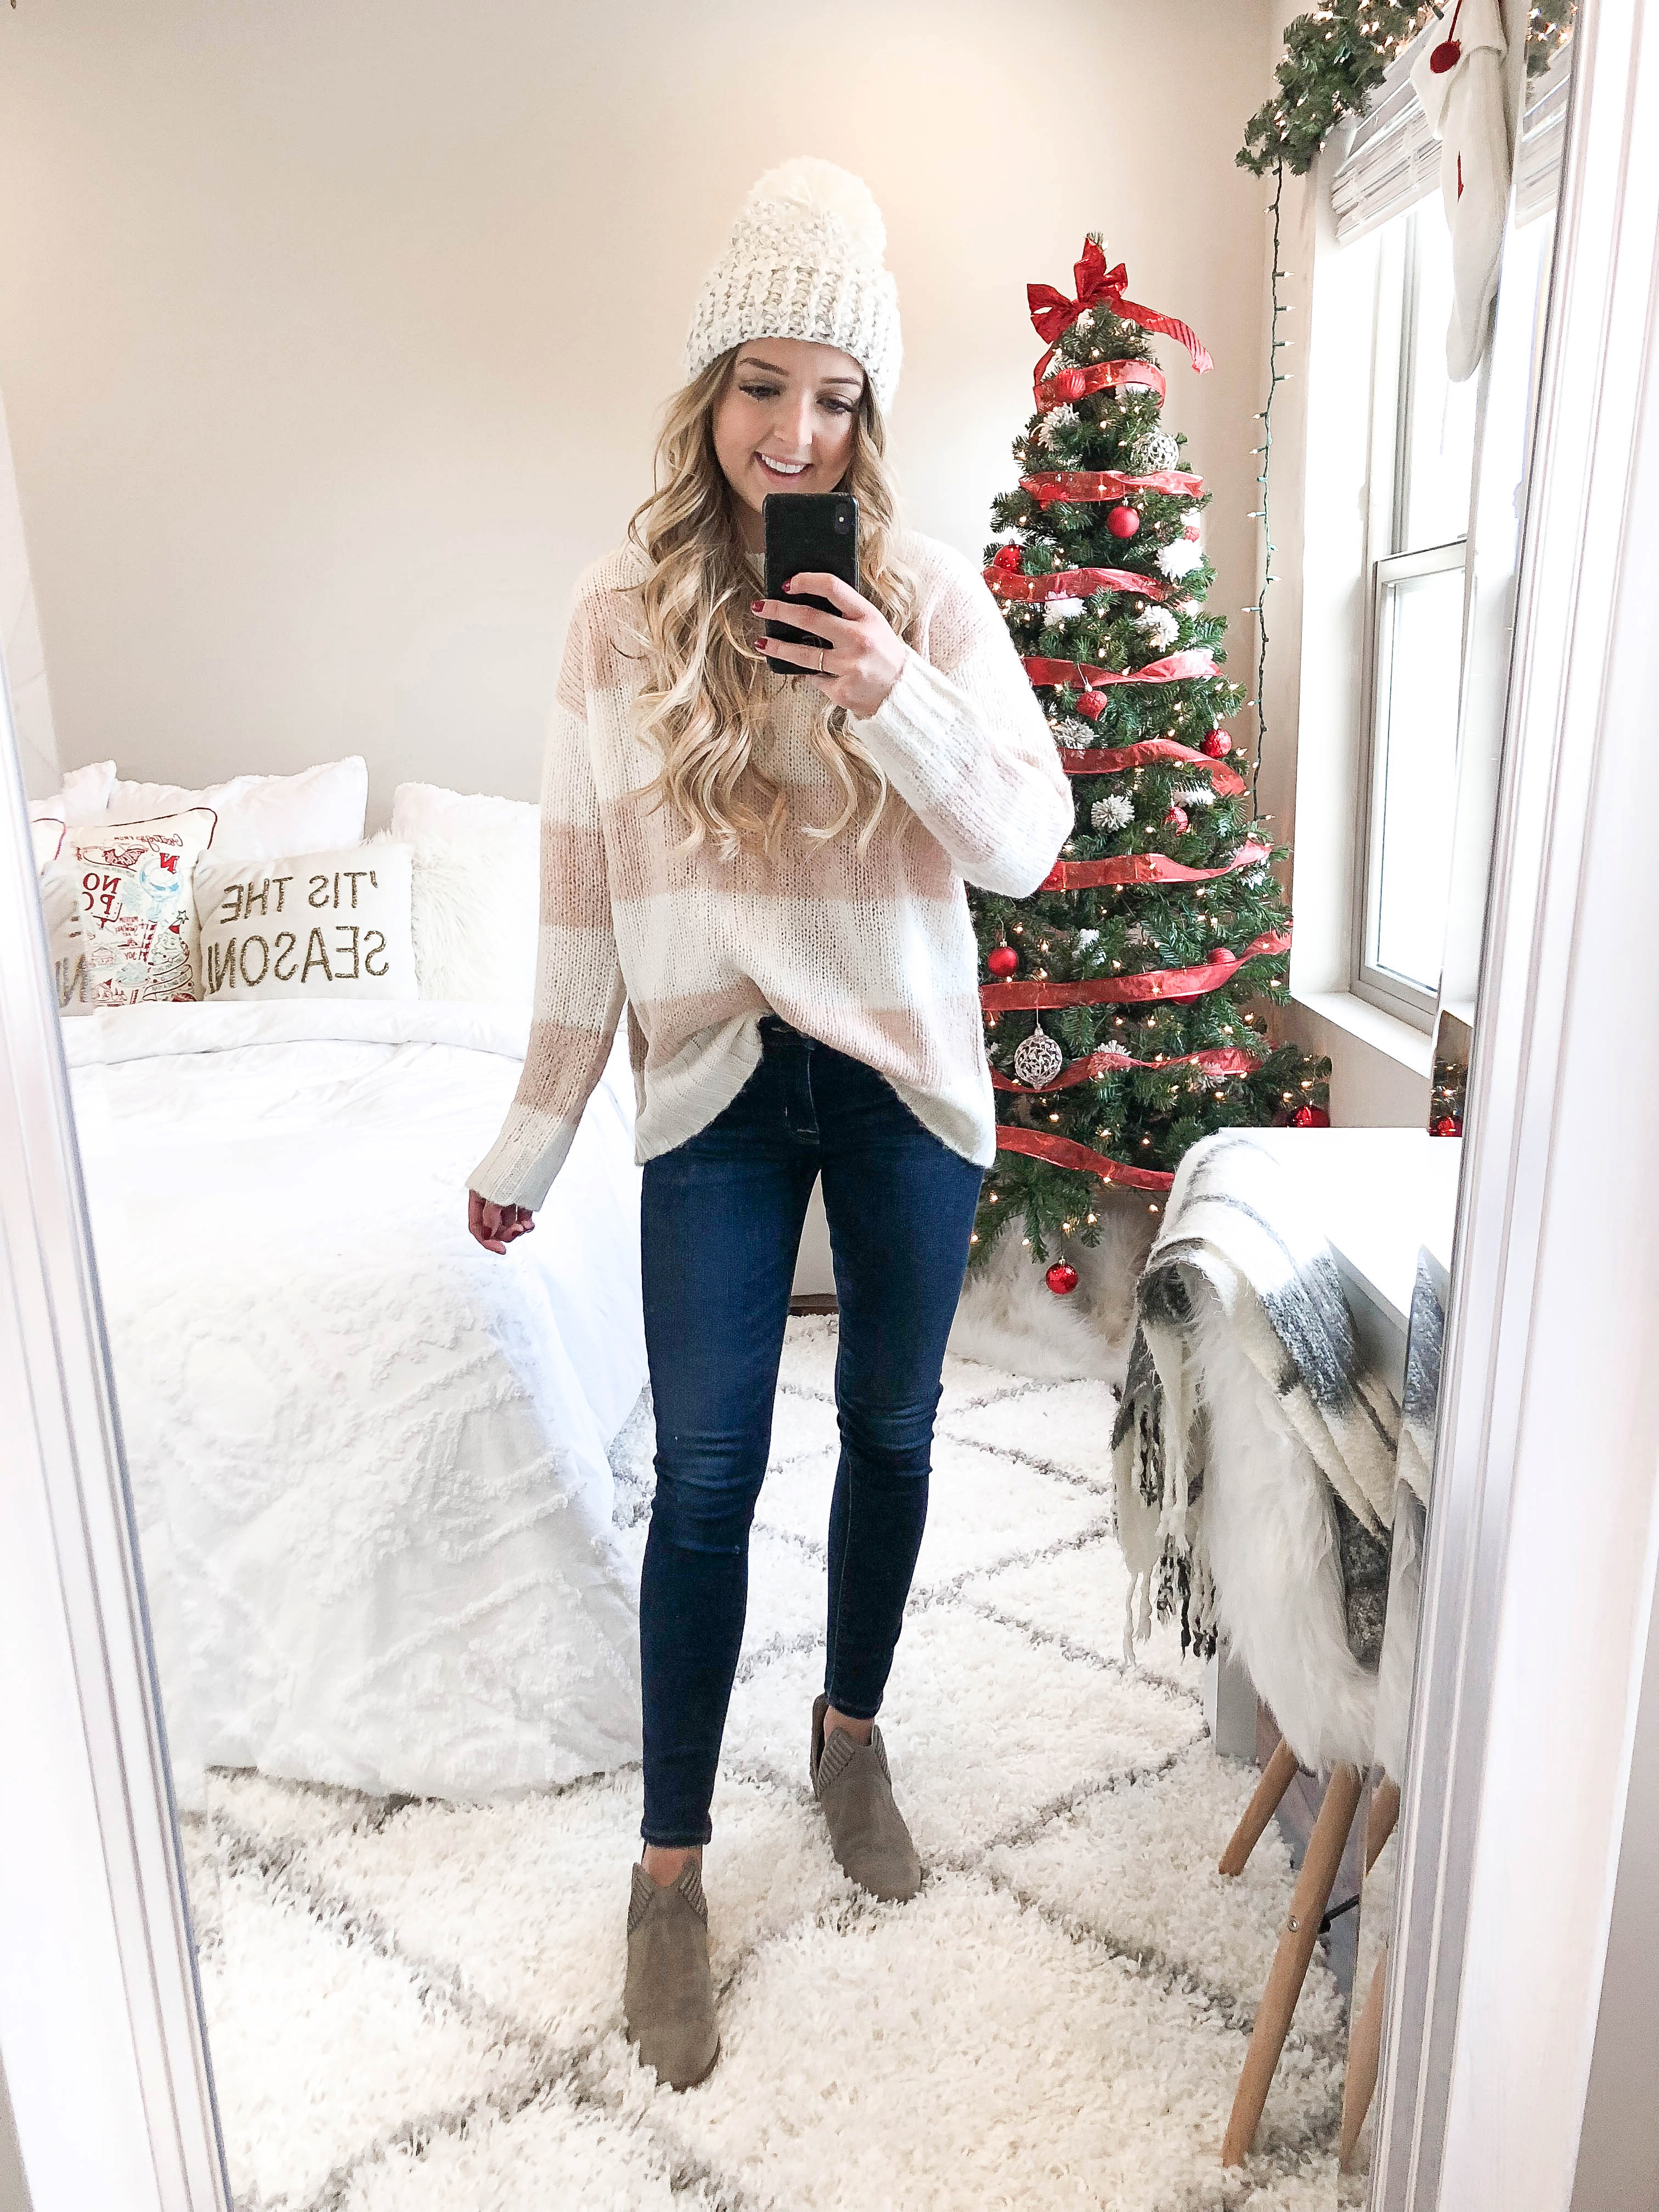 Black Friday and Cyber monday try on haul! Brands and stores like forever 21, loft, nordstrom, express and more! Details on fashion blog daily dose of charm by lauren lindmark